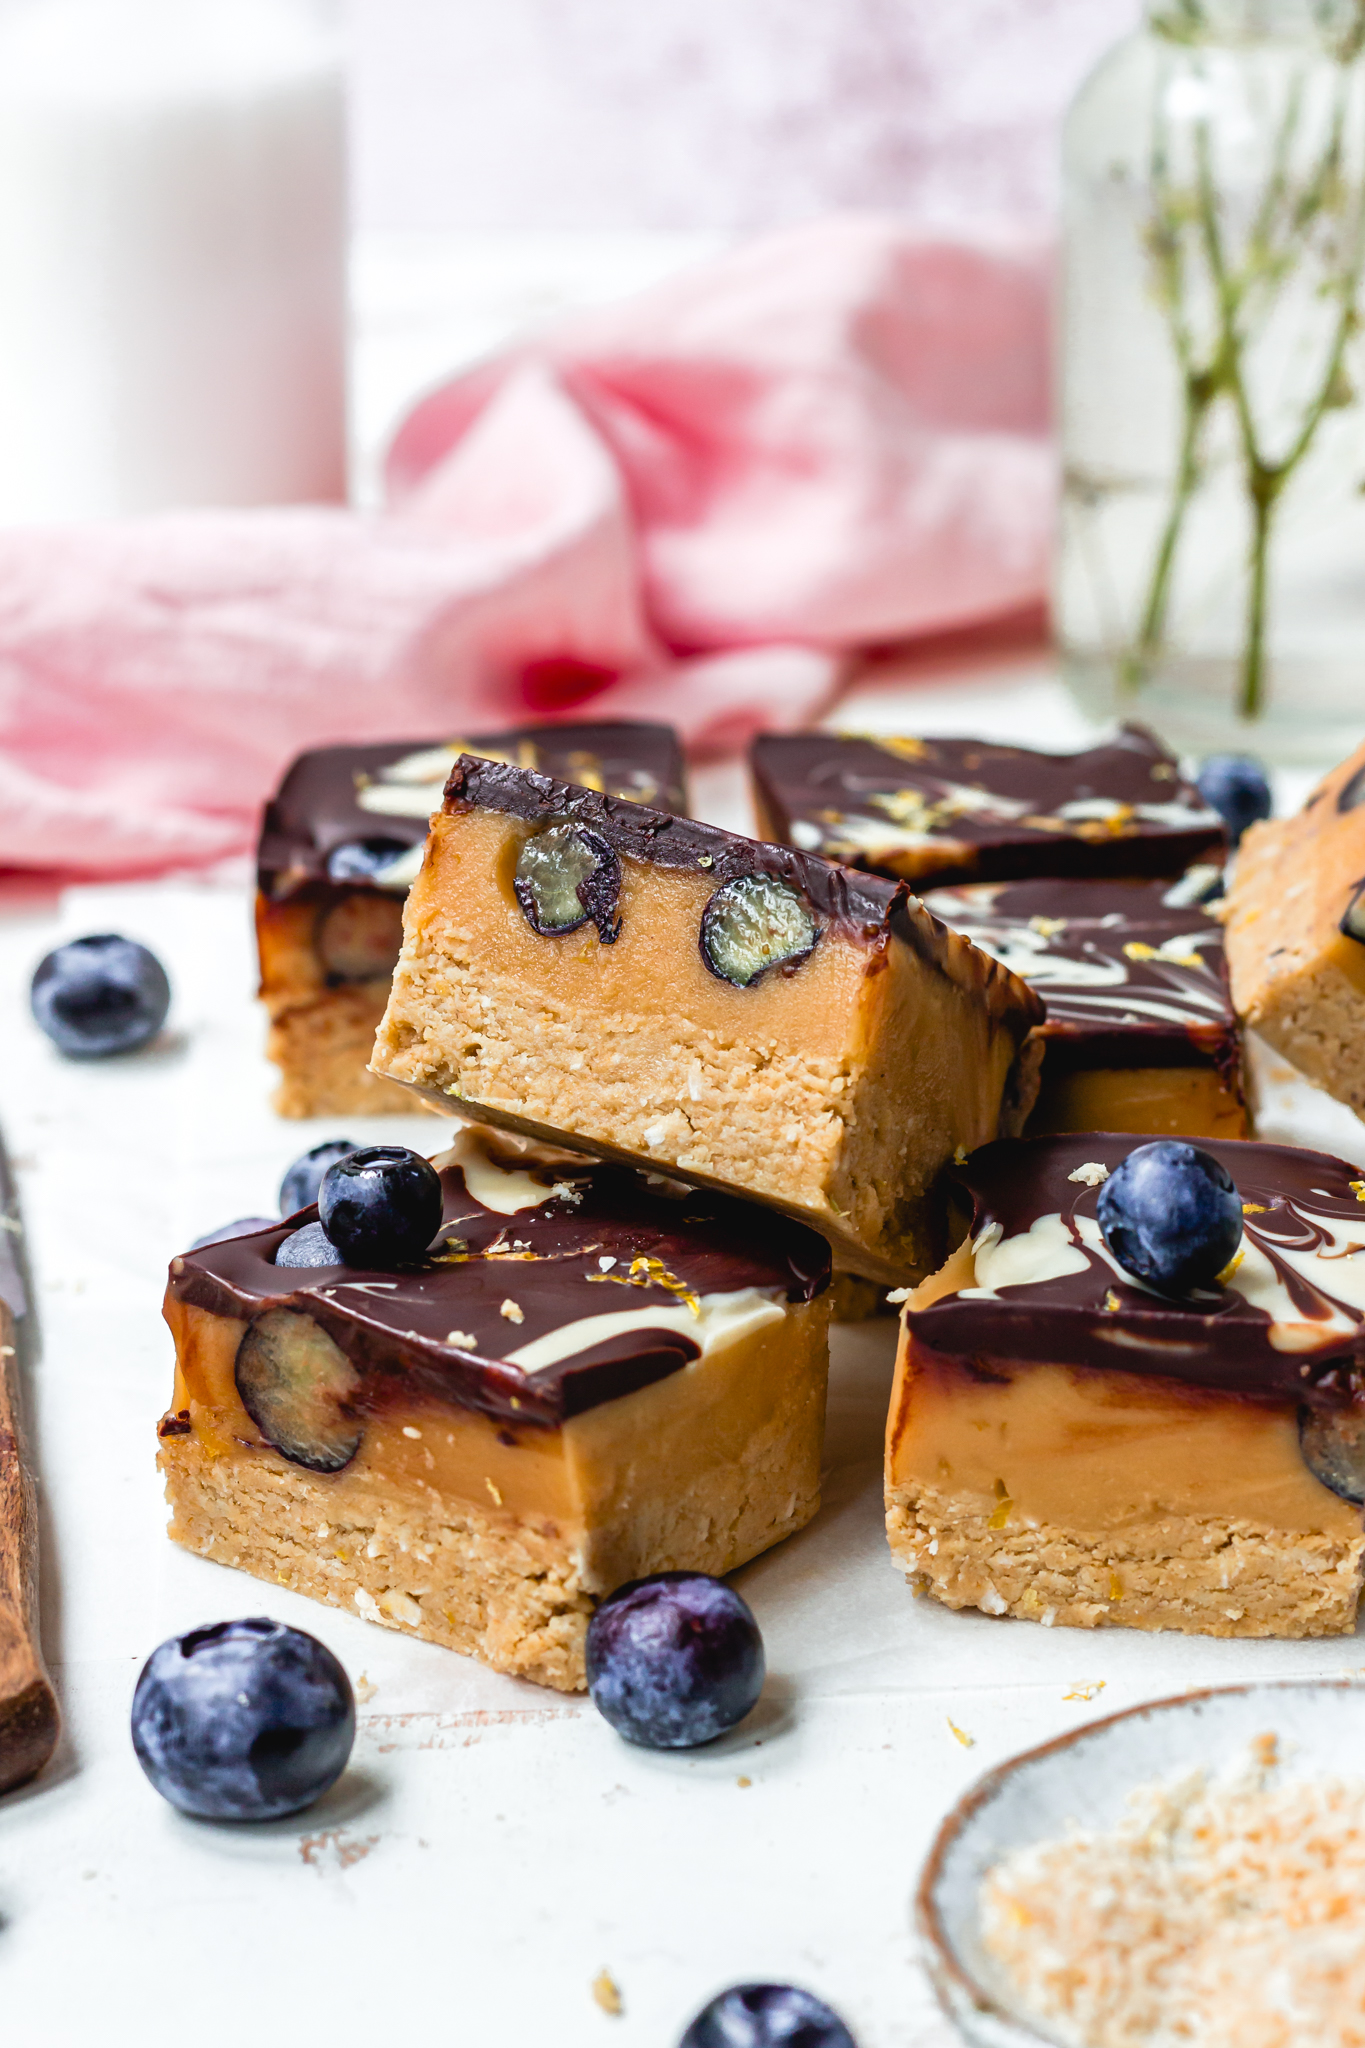 A few Lemon and Blueberry Chocolate Caramel Slices